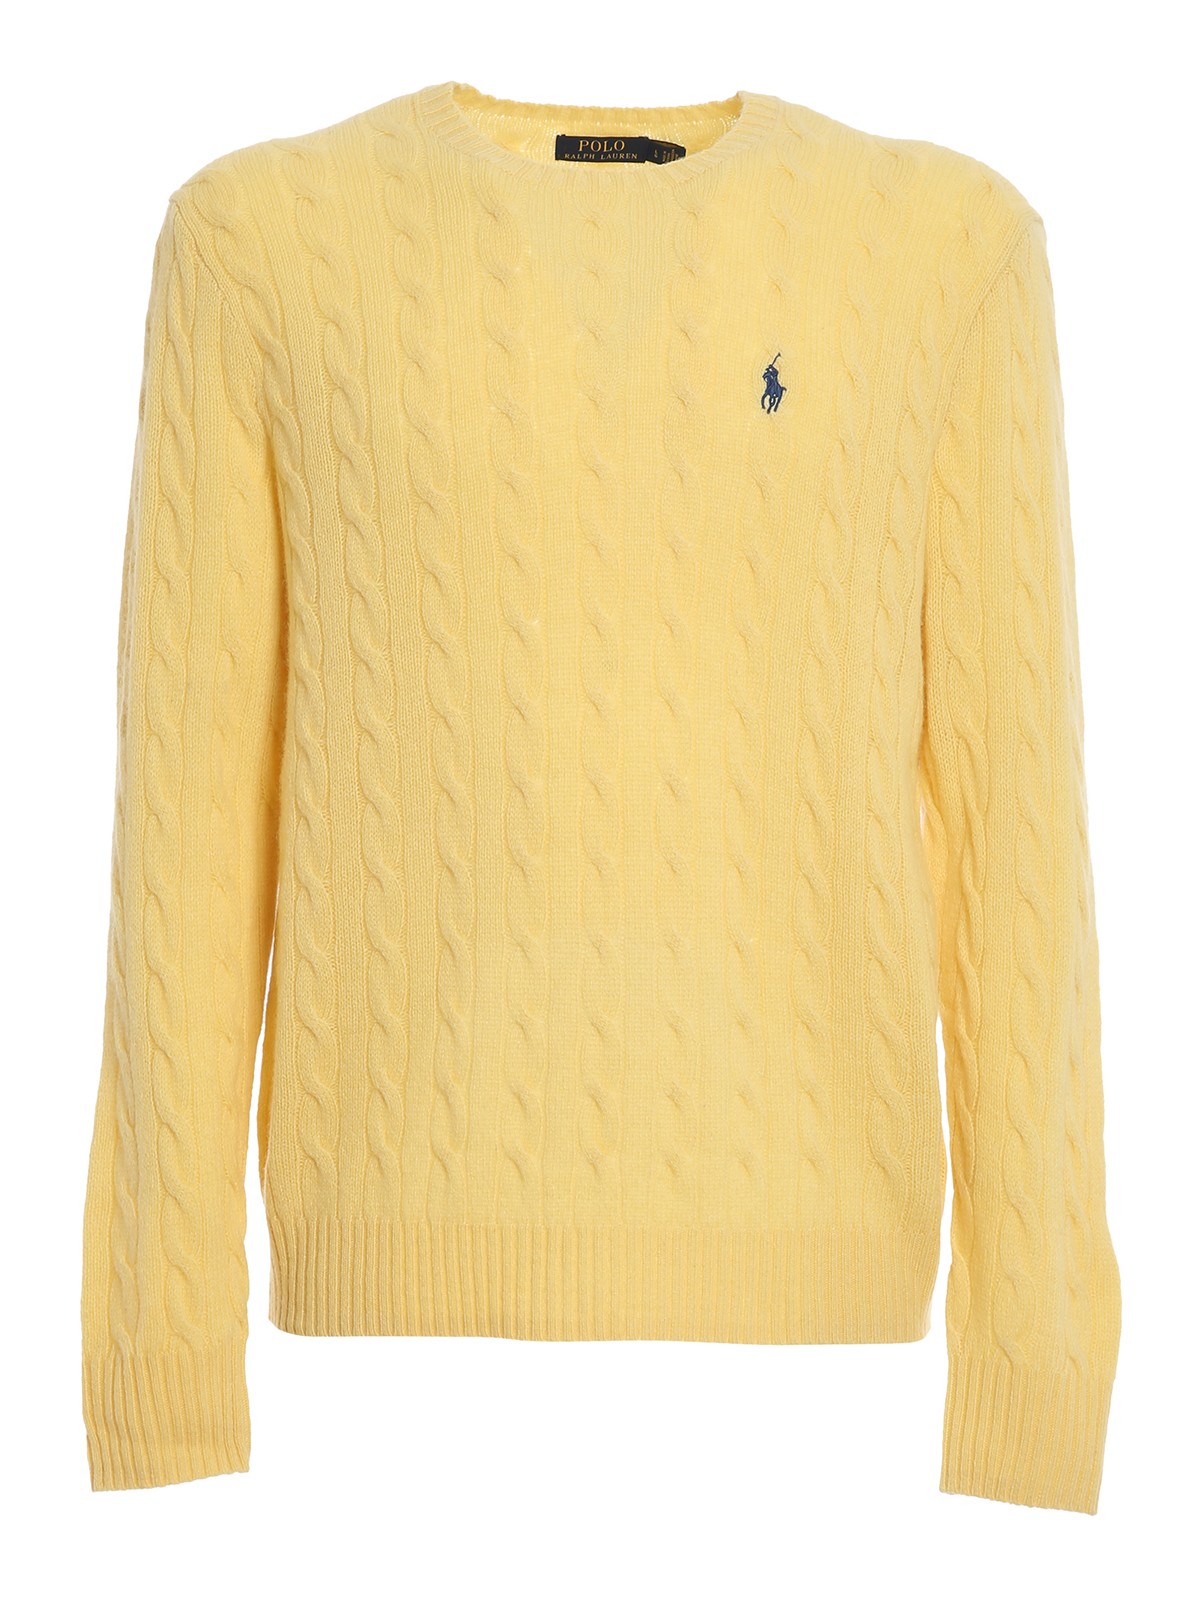 ralph lauren yellow cable knit sweater